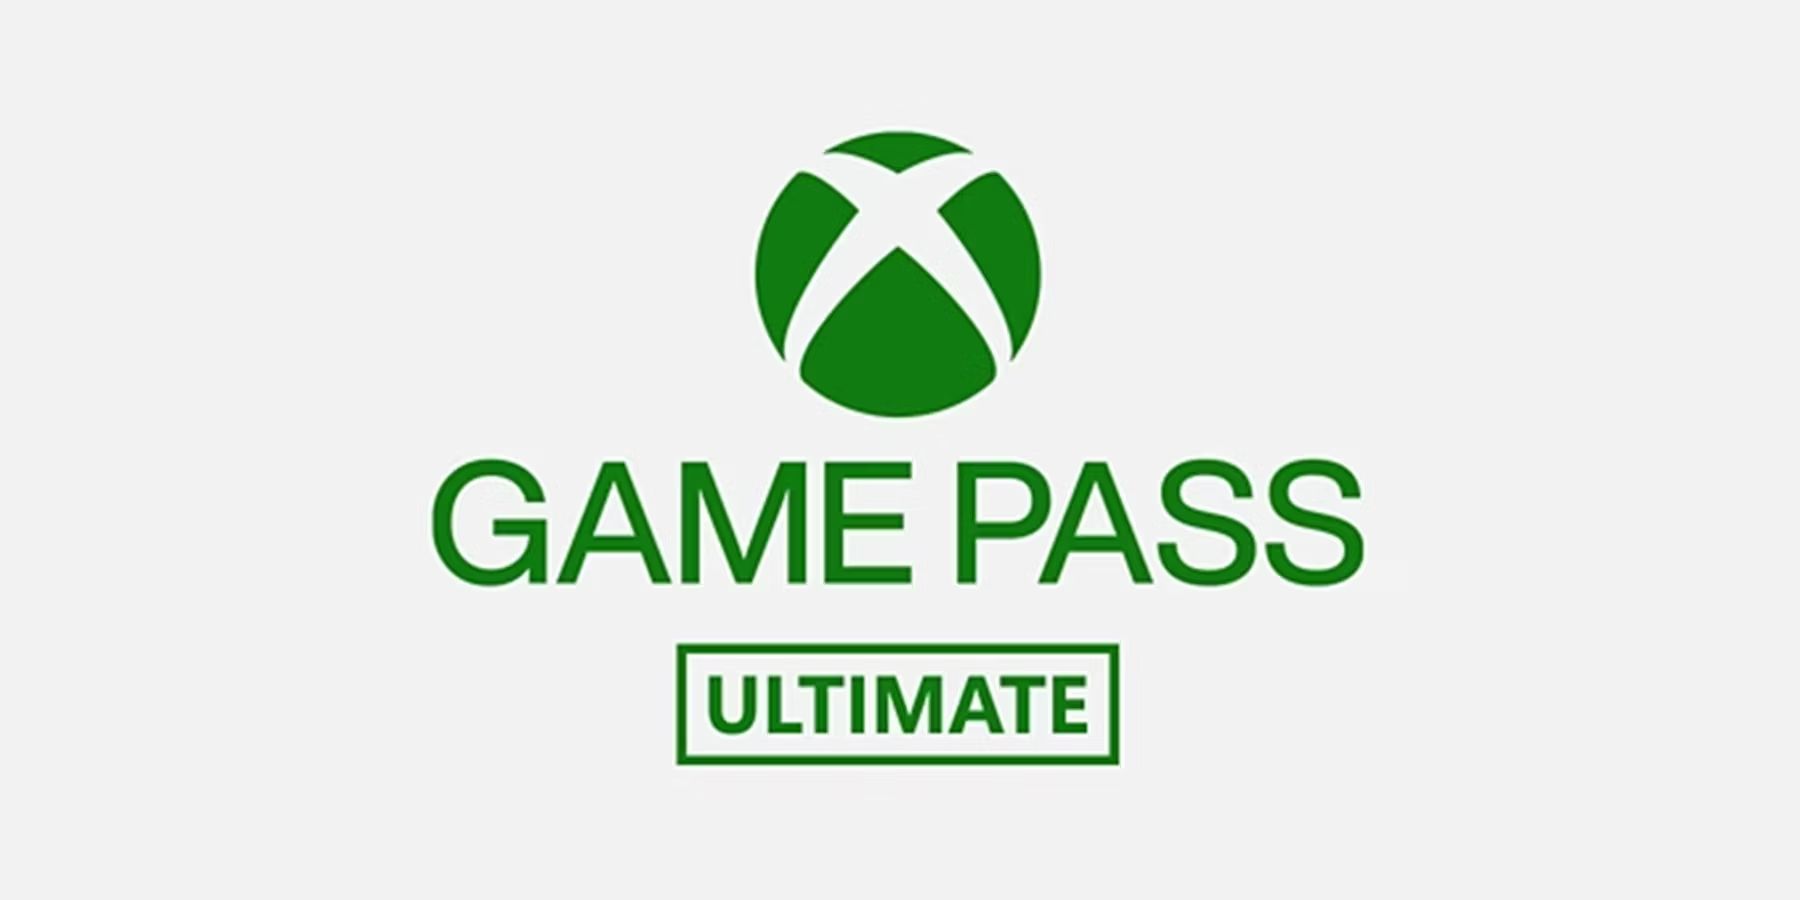 EA Play Will Be Included with Xbox Game Pass Ultimate & Xbox Game Pass For  PC Subscriptions Later This Year - Operation Sports